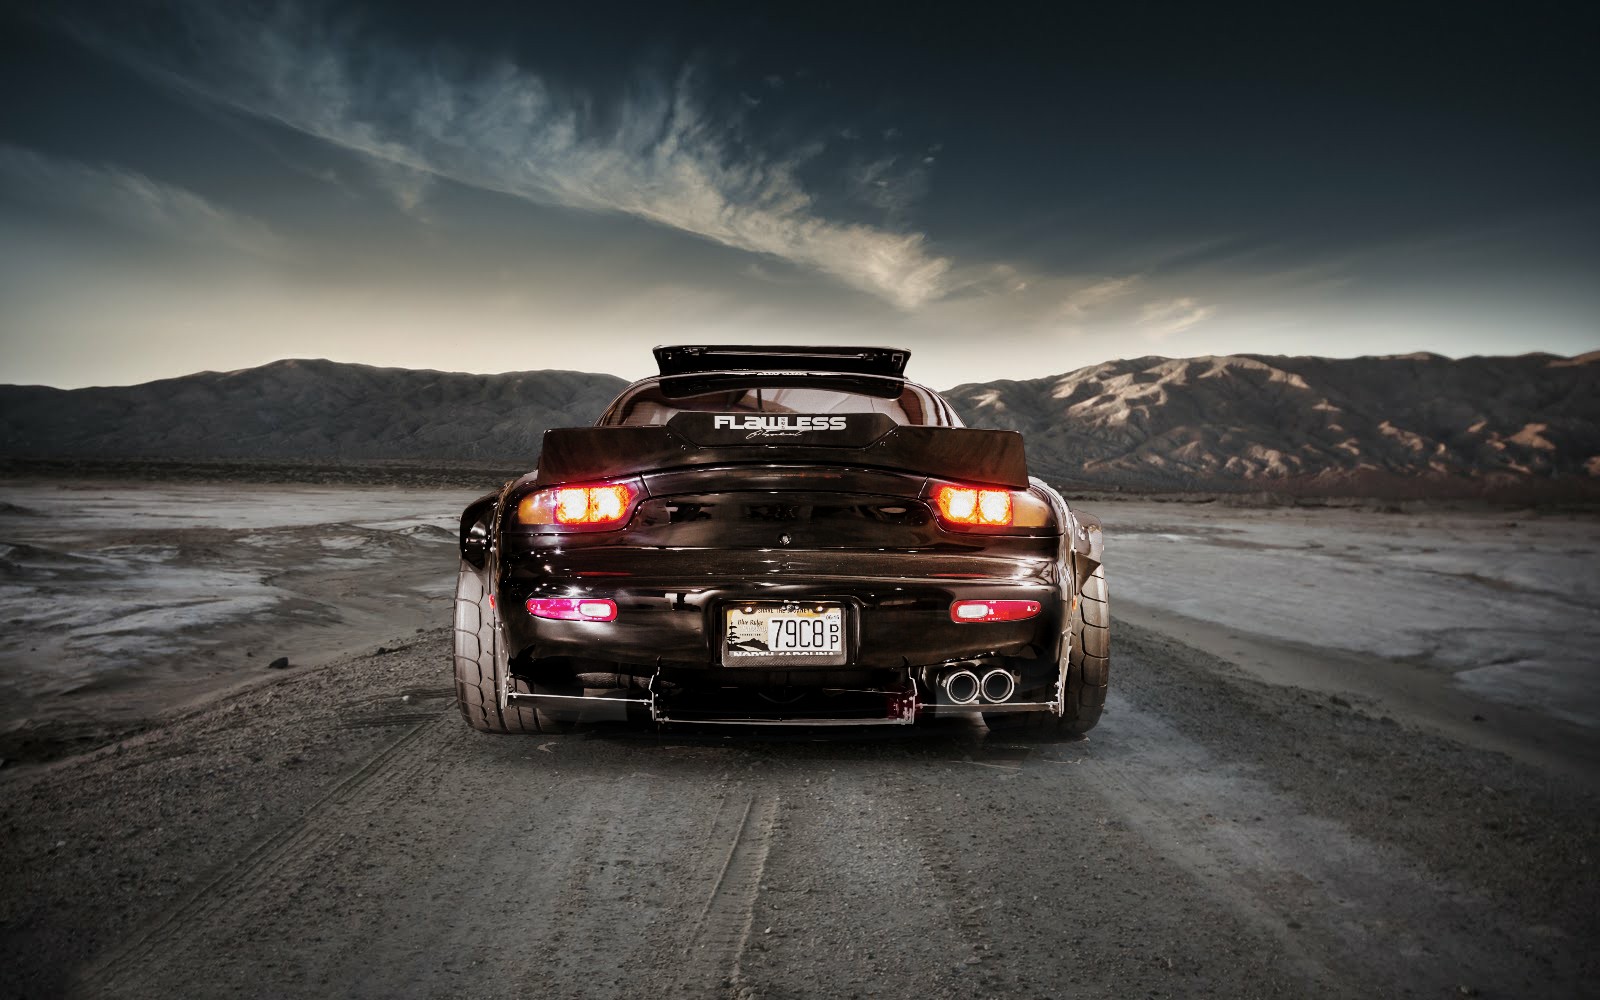 Gallery For Gt Mazda Rx7 Wallpaper